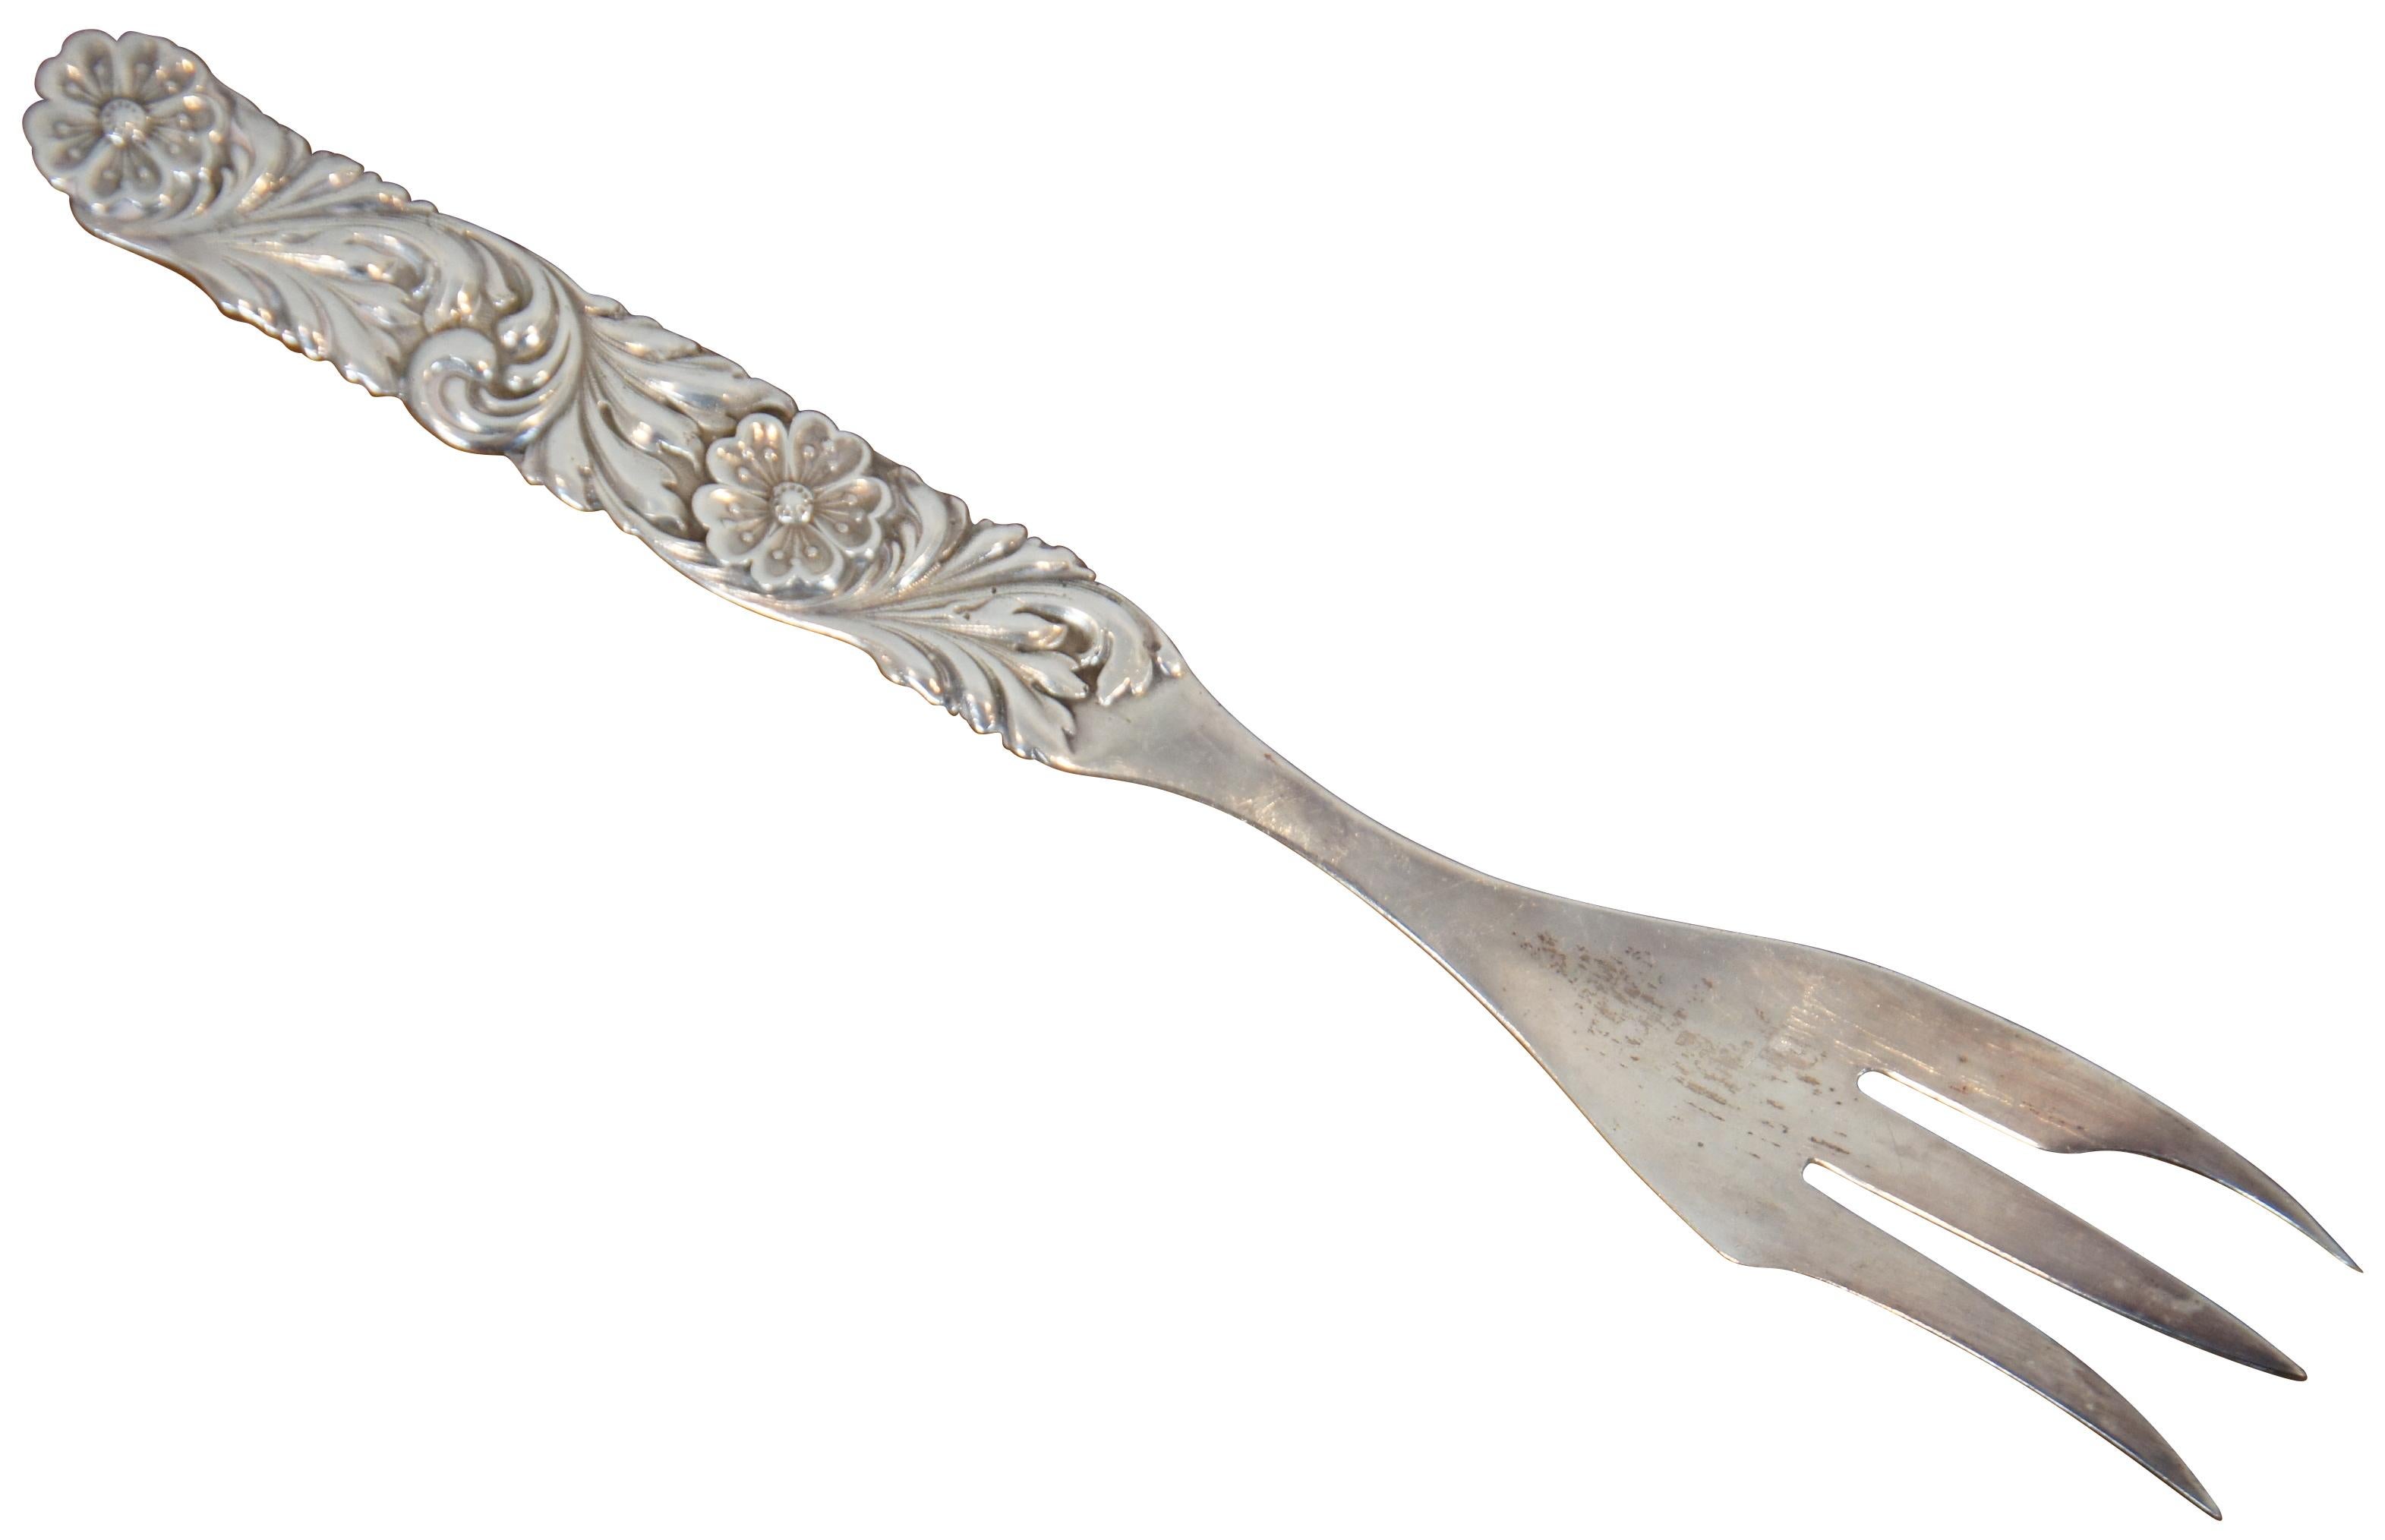 Rare antique Shiebler sterling silver 925 meat serving fork featuring the Daisy floral medallion design with swirling leaves.

Provenance: Jerome Schottenstein Estate, Columbus Ohio. Jerome was was an American entrepreneur and philanthropist,